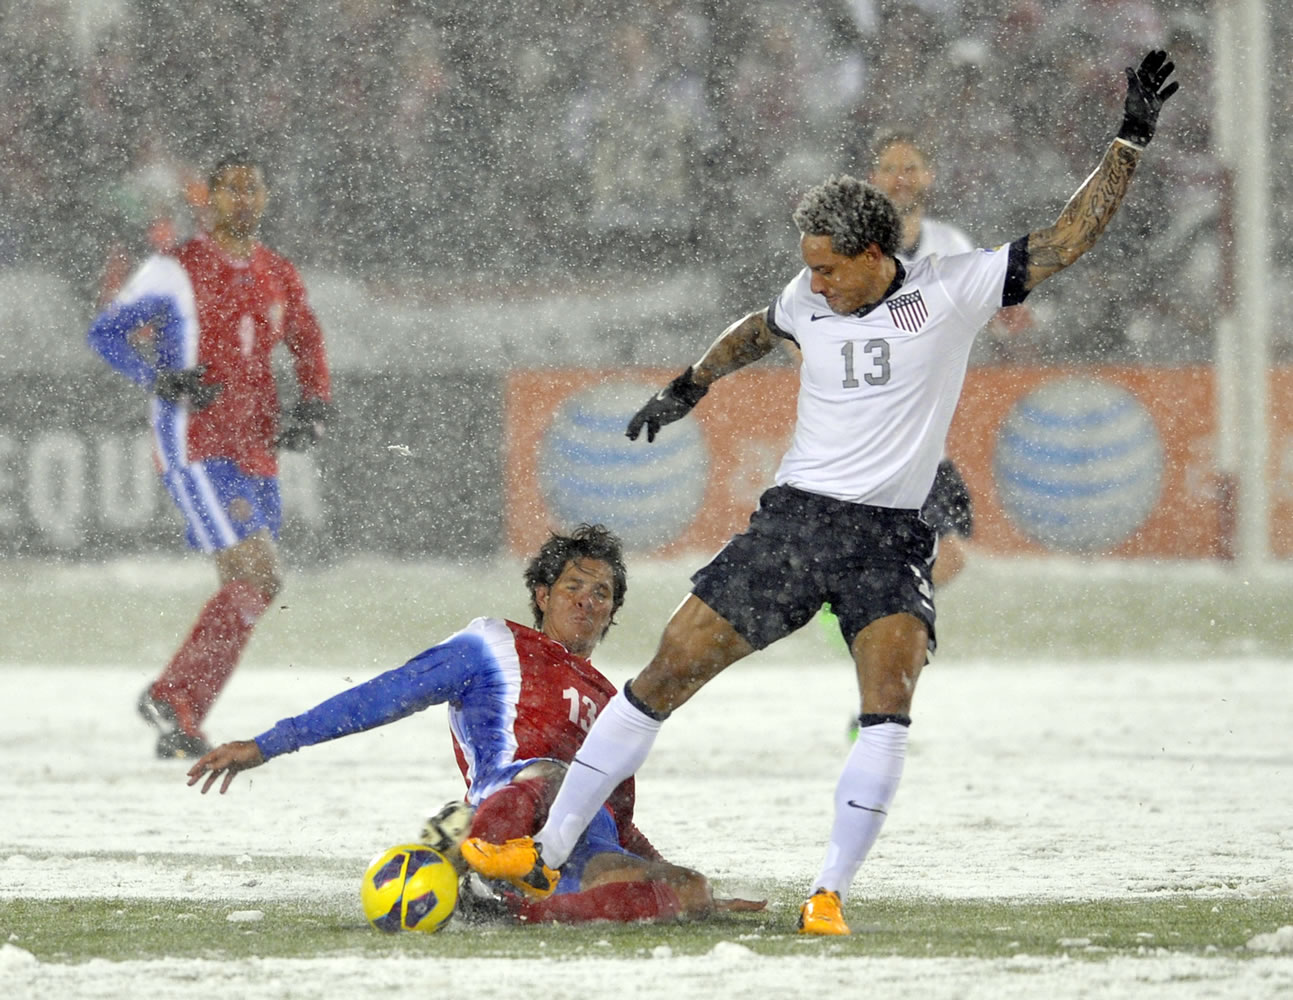 The blizzard conditions at Commerce City, Colo., on Friday upstaged the U.S.